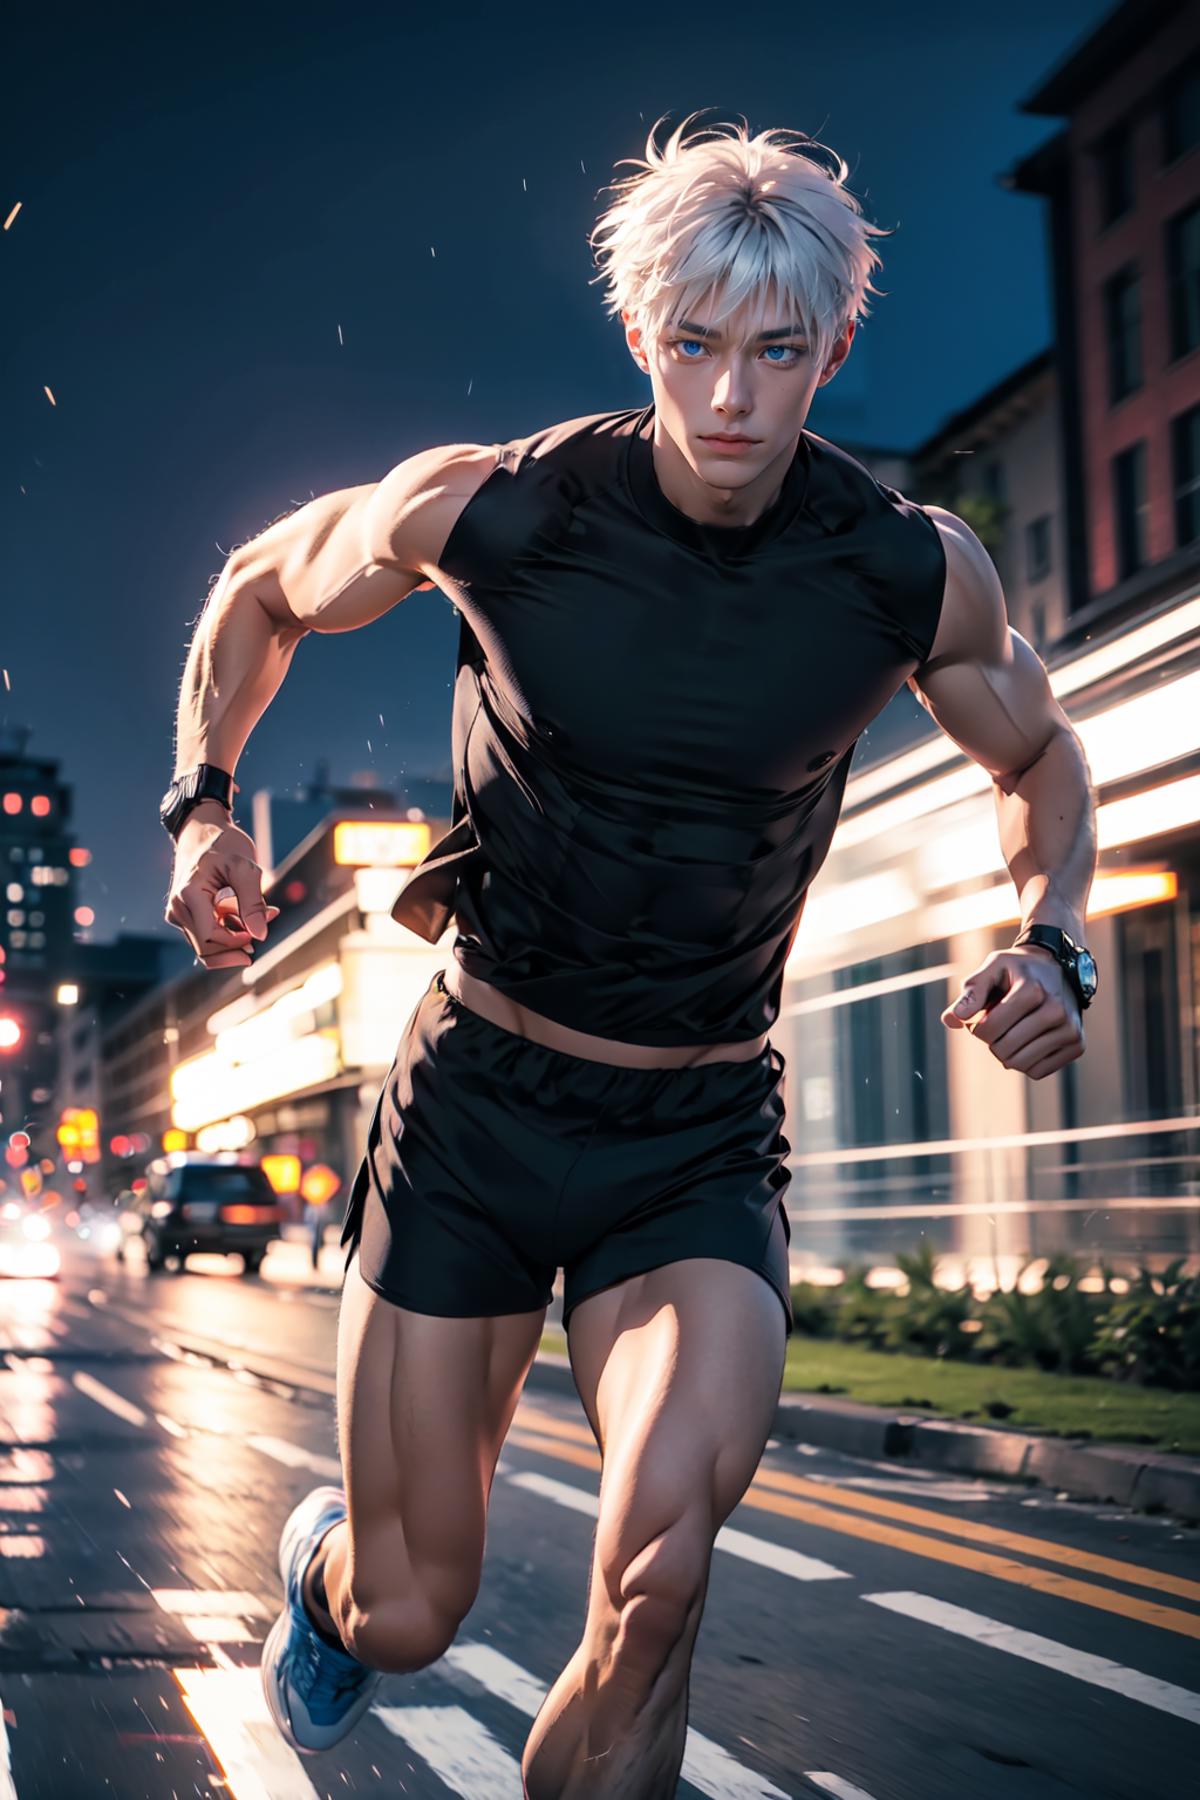 A man running on the street at night wearing black shorts and a black shirt.